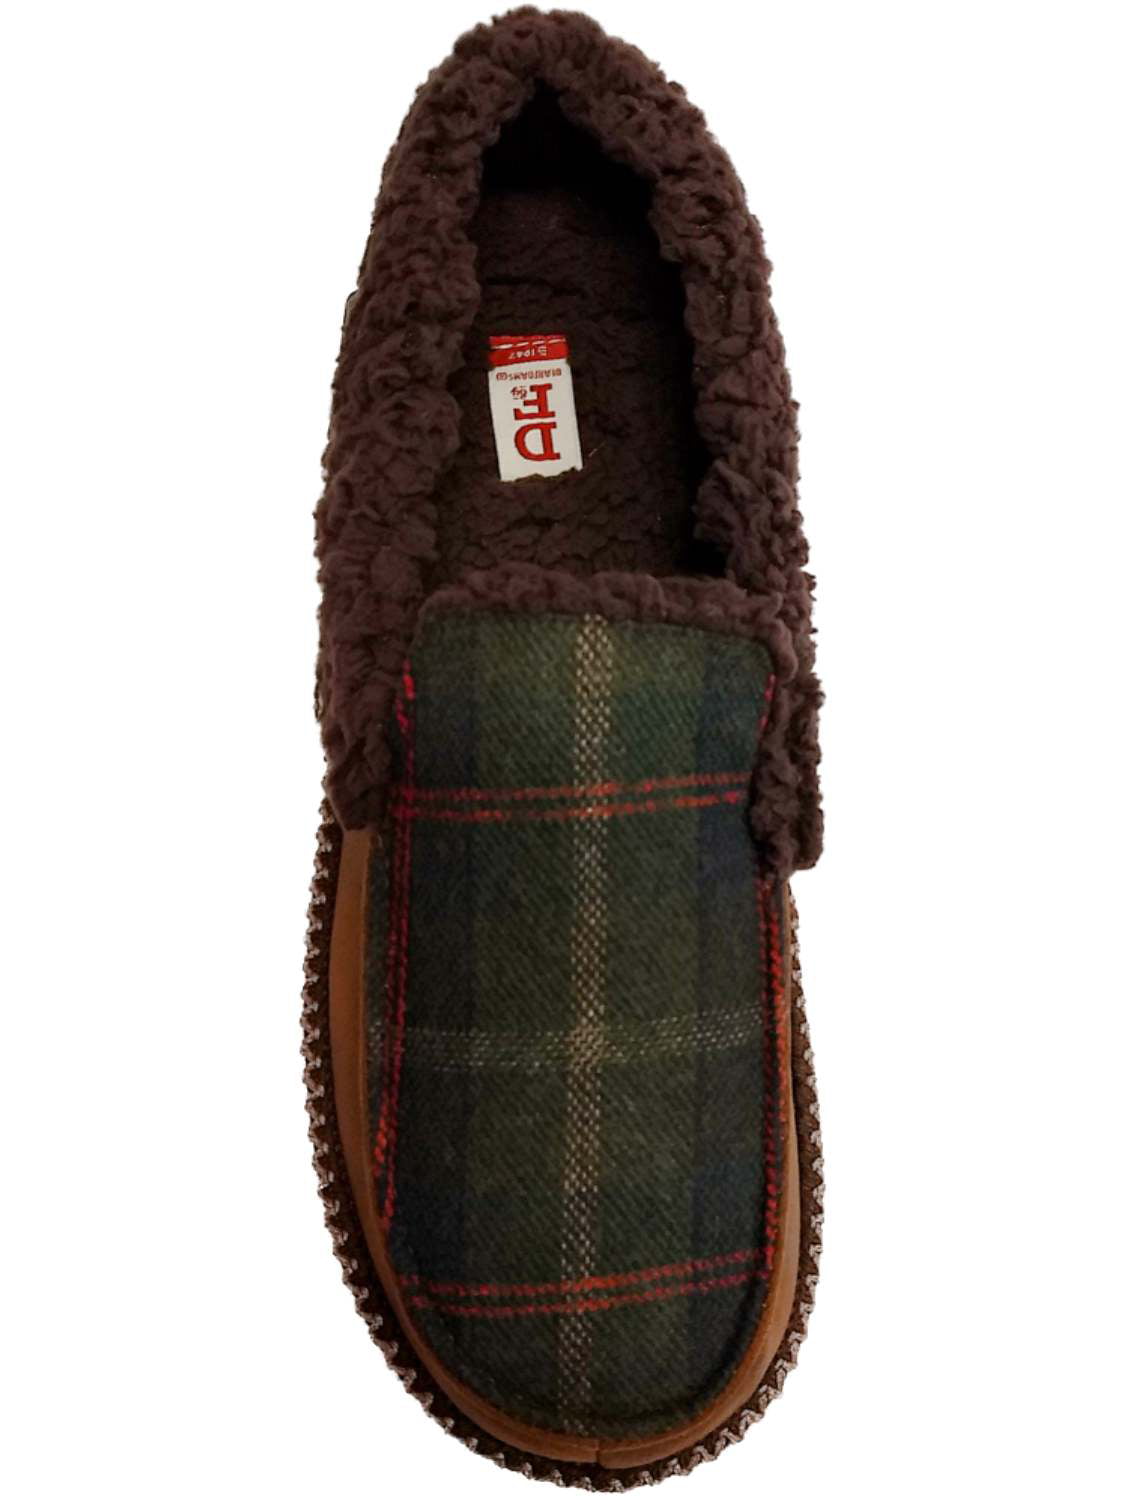 Mens Moccasins Slippers Loafers Faux Suede Sheepskin Tartan Lined House Shoes